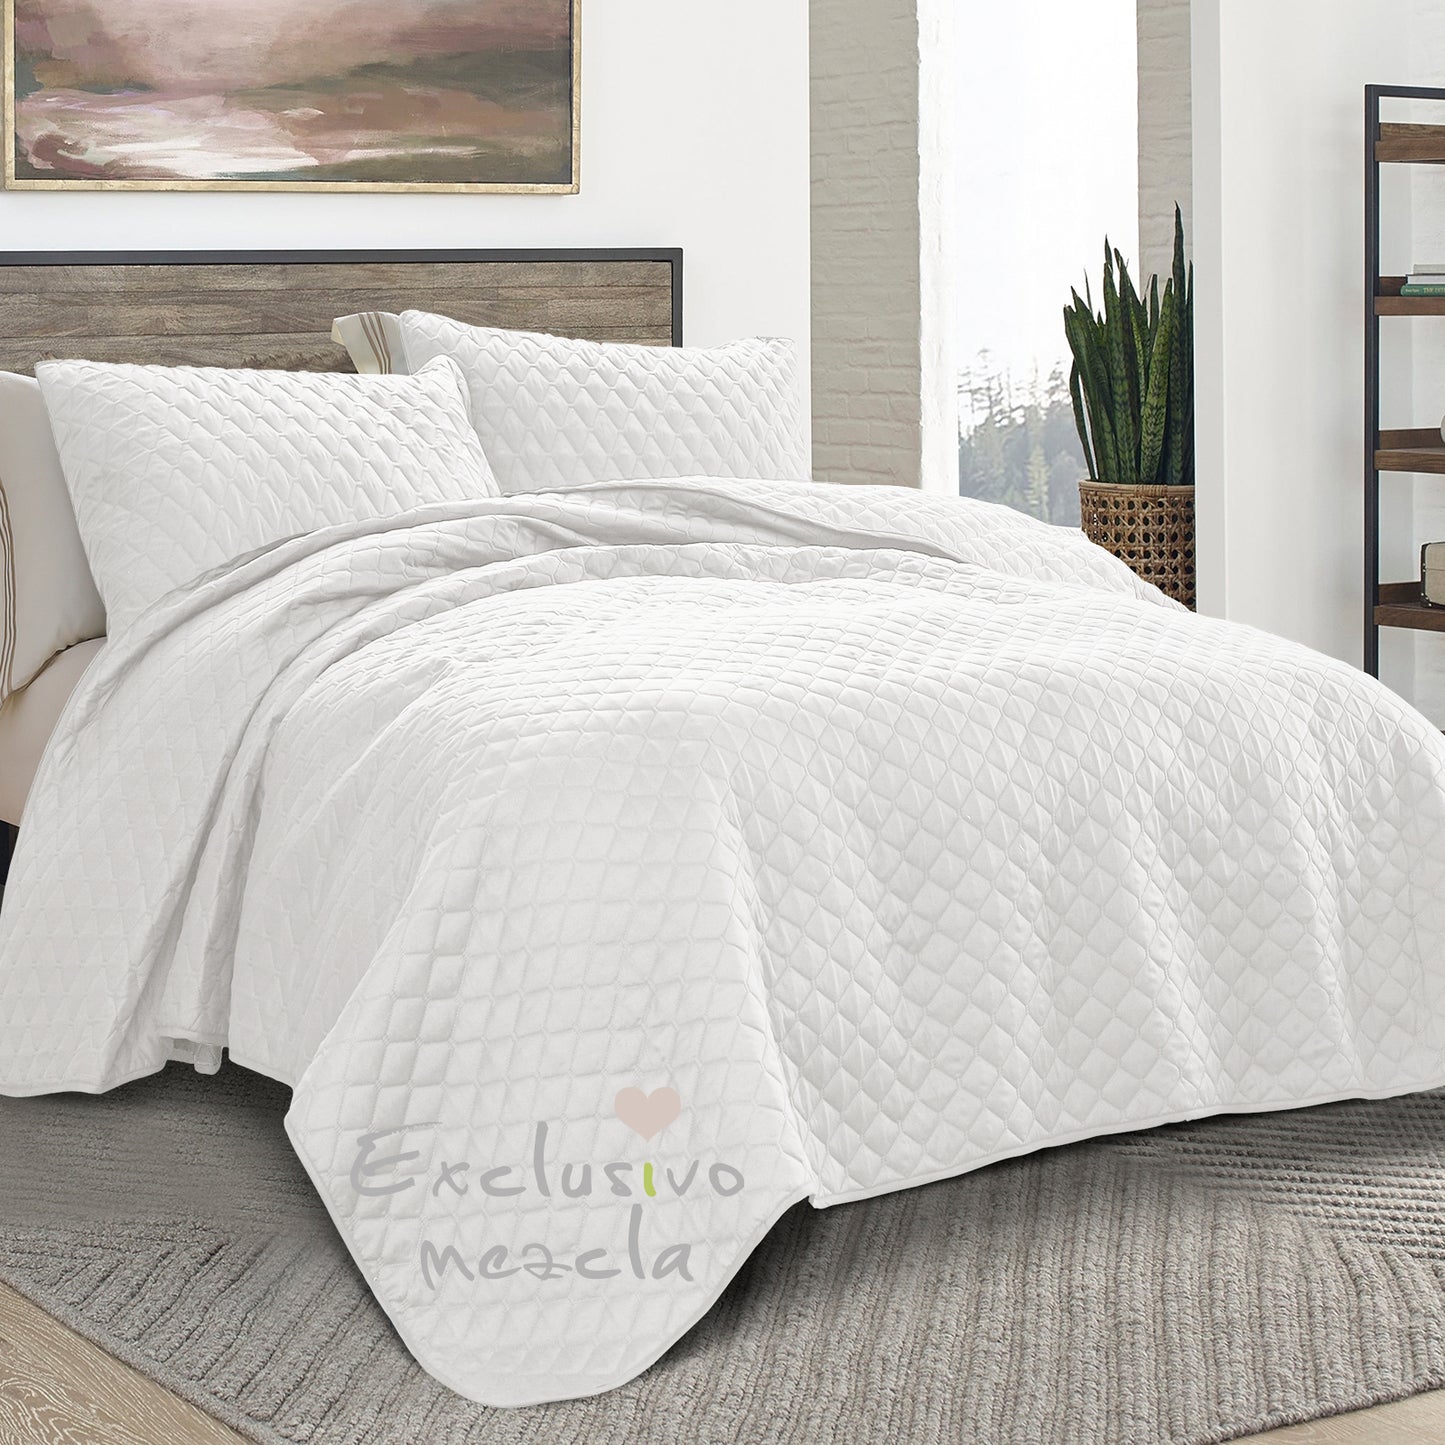 Exclusivo Mezcla Ultrasonic Reversible Twin Quilt Bedding Set with Pillow Sham, Lightweight Quilts Twin Size, Soft Bedspreads Bed Coverlets for All Seasons - (White, 68"x88")